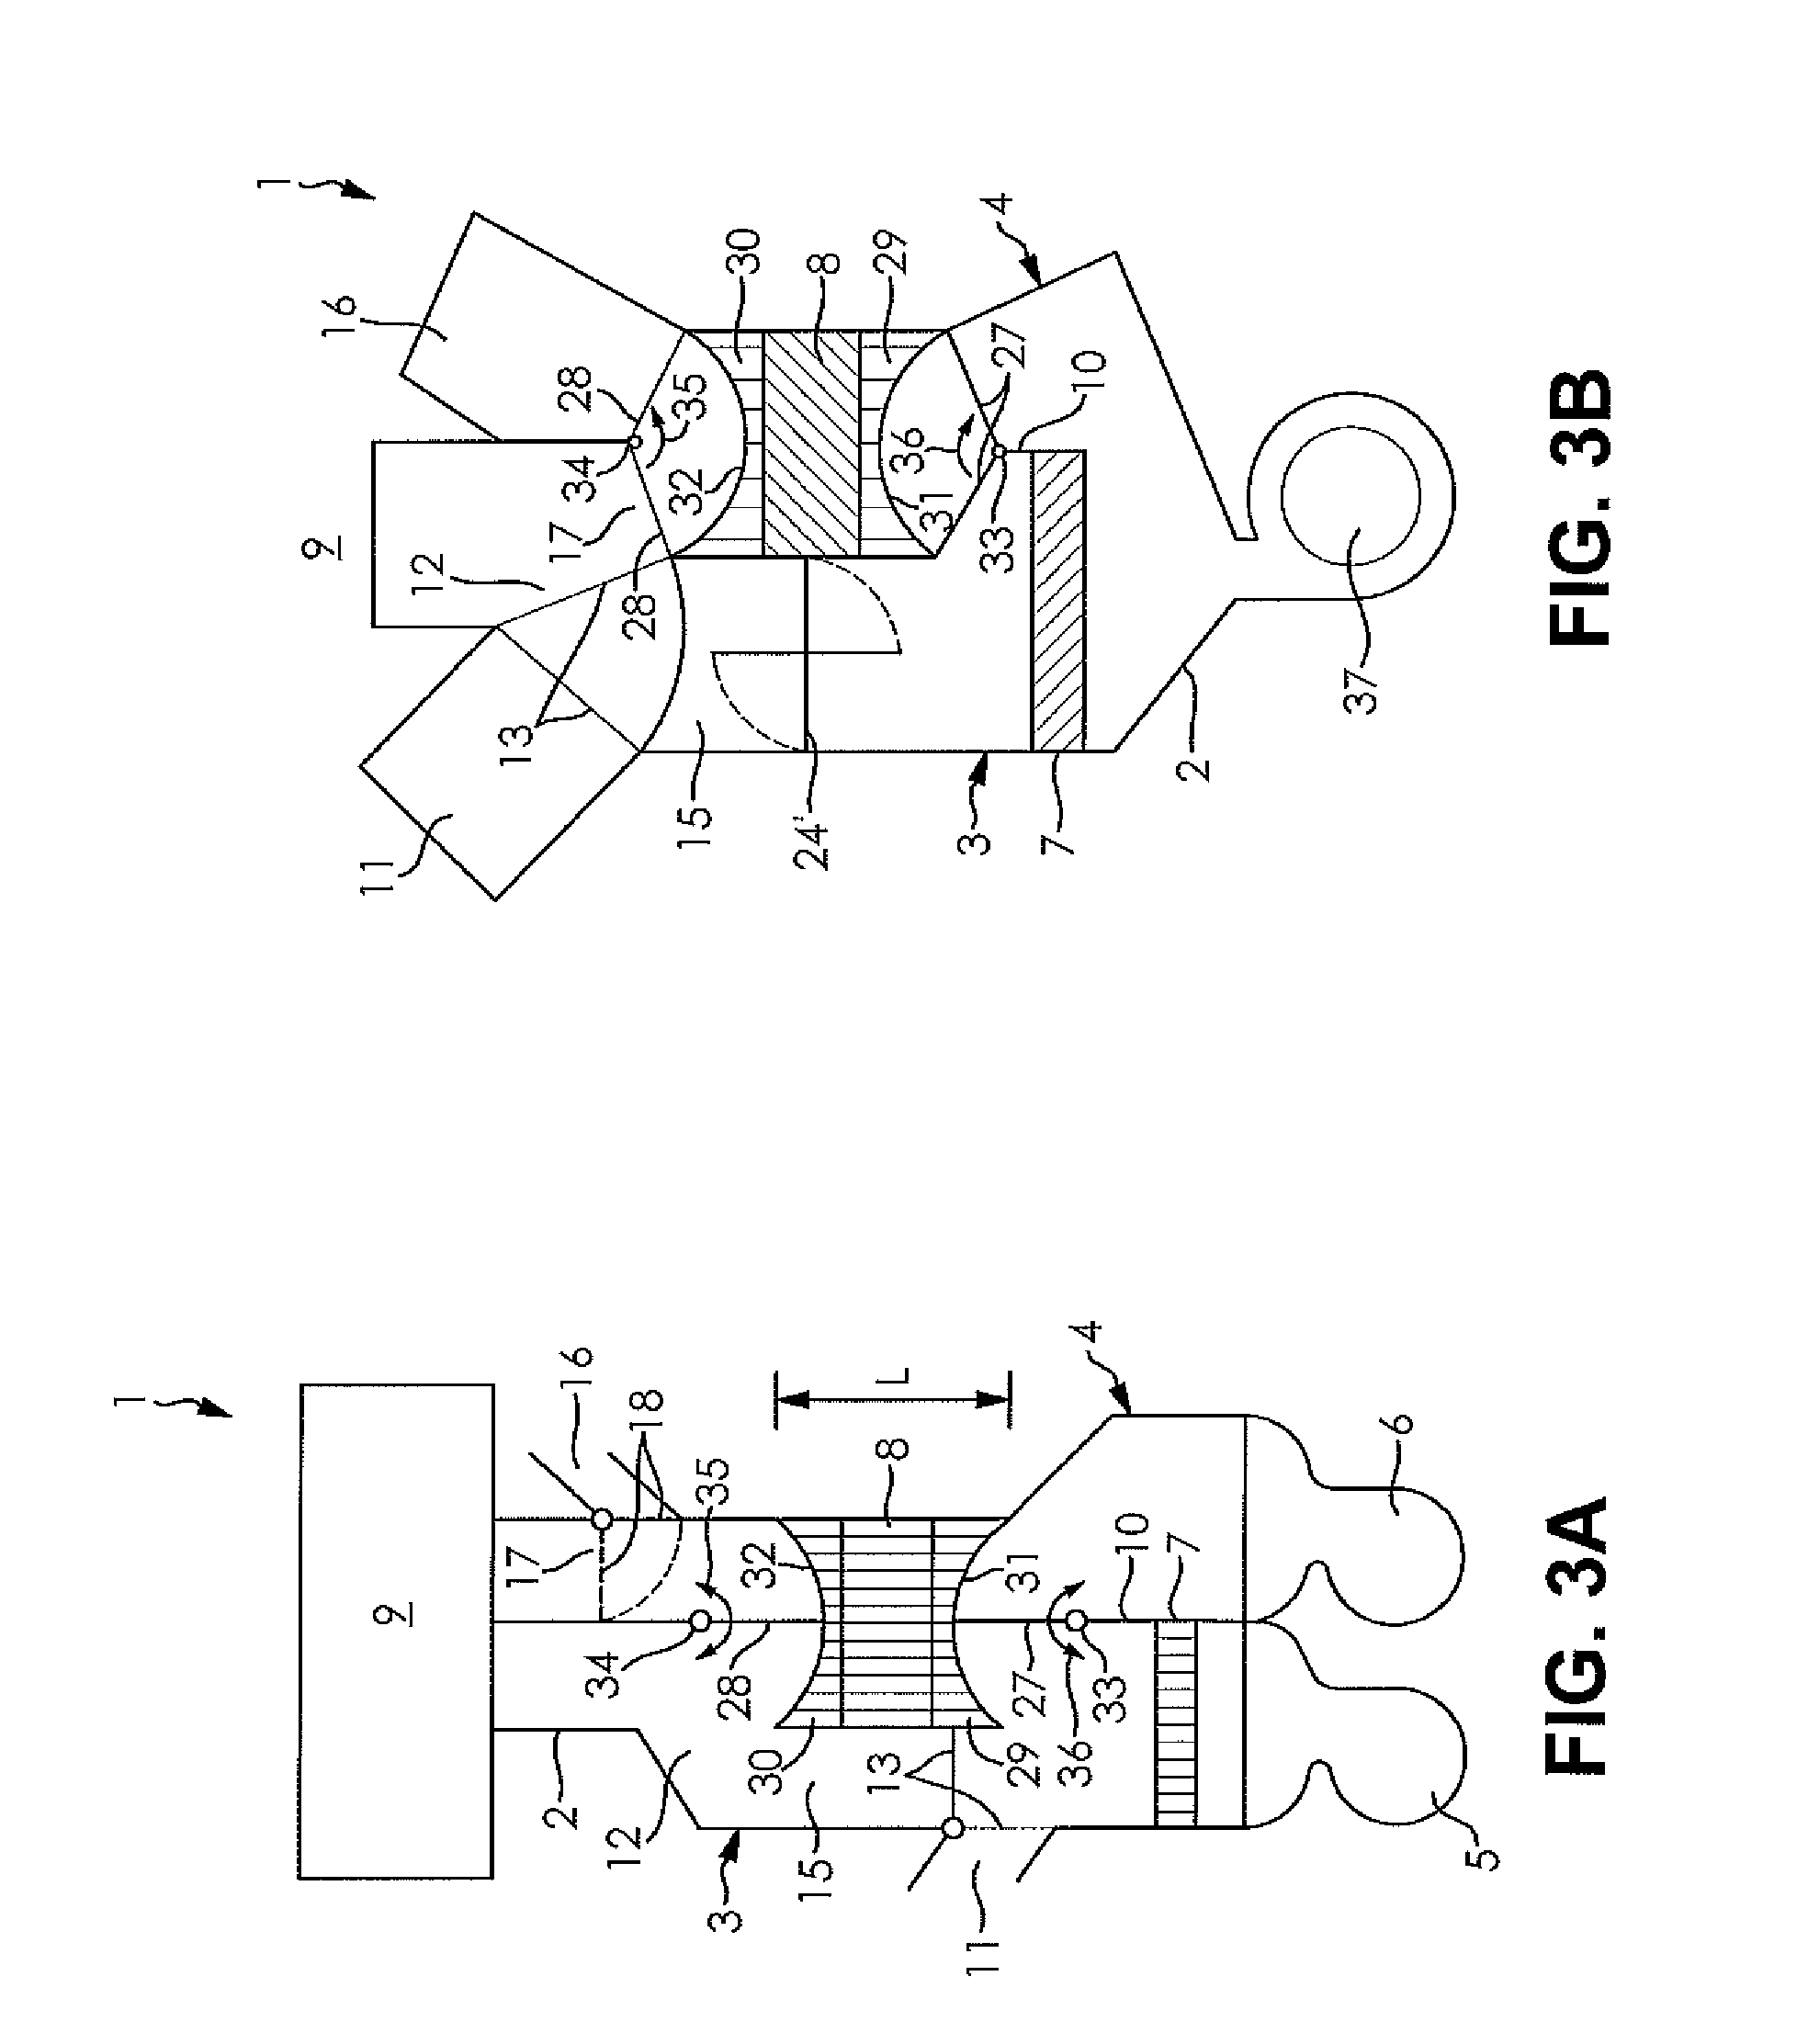 Heat exchanger arrangement for heat uptake and air conditioning system of a motor vehicle